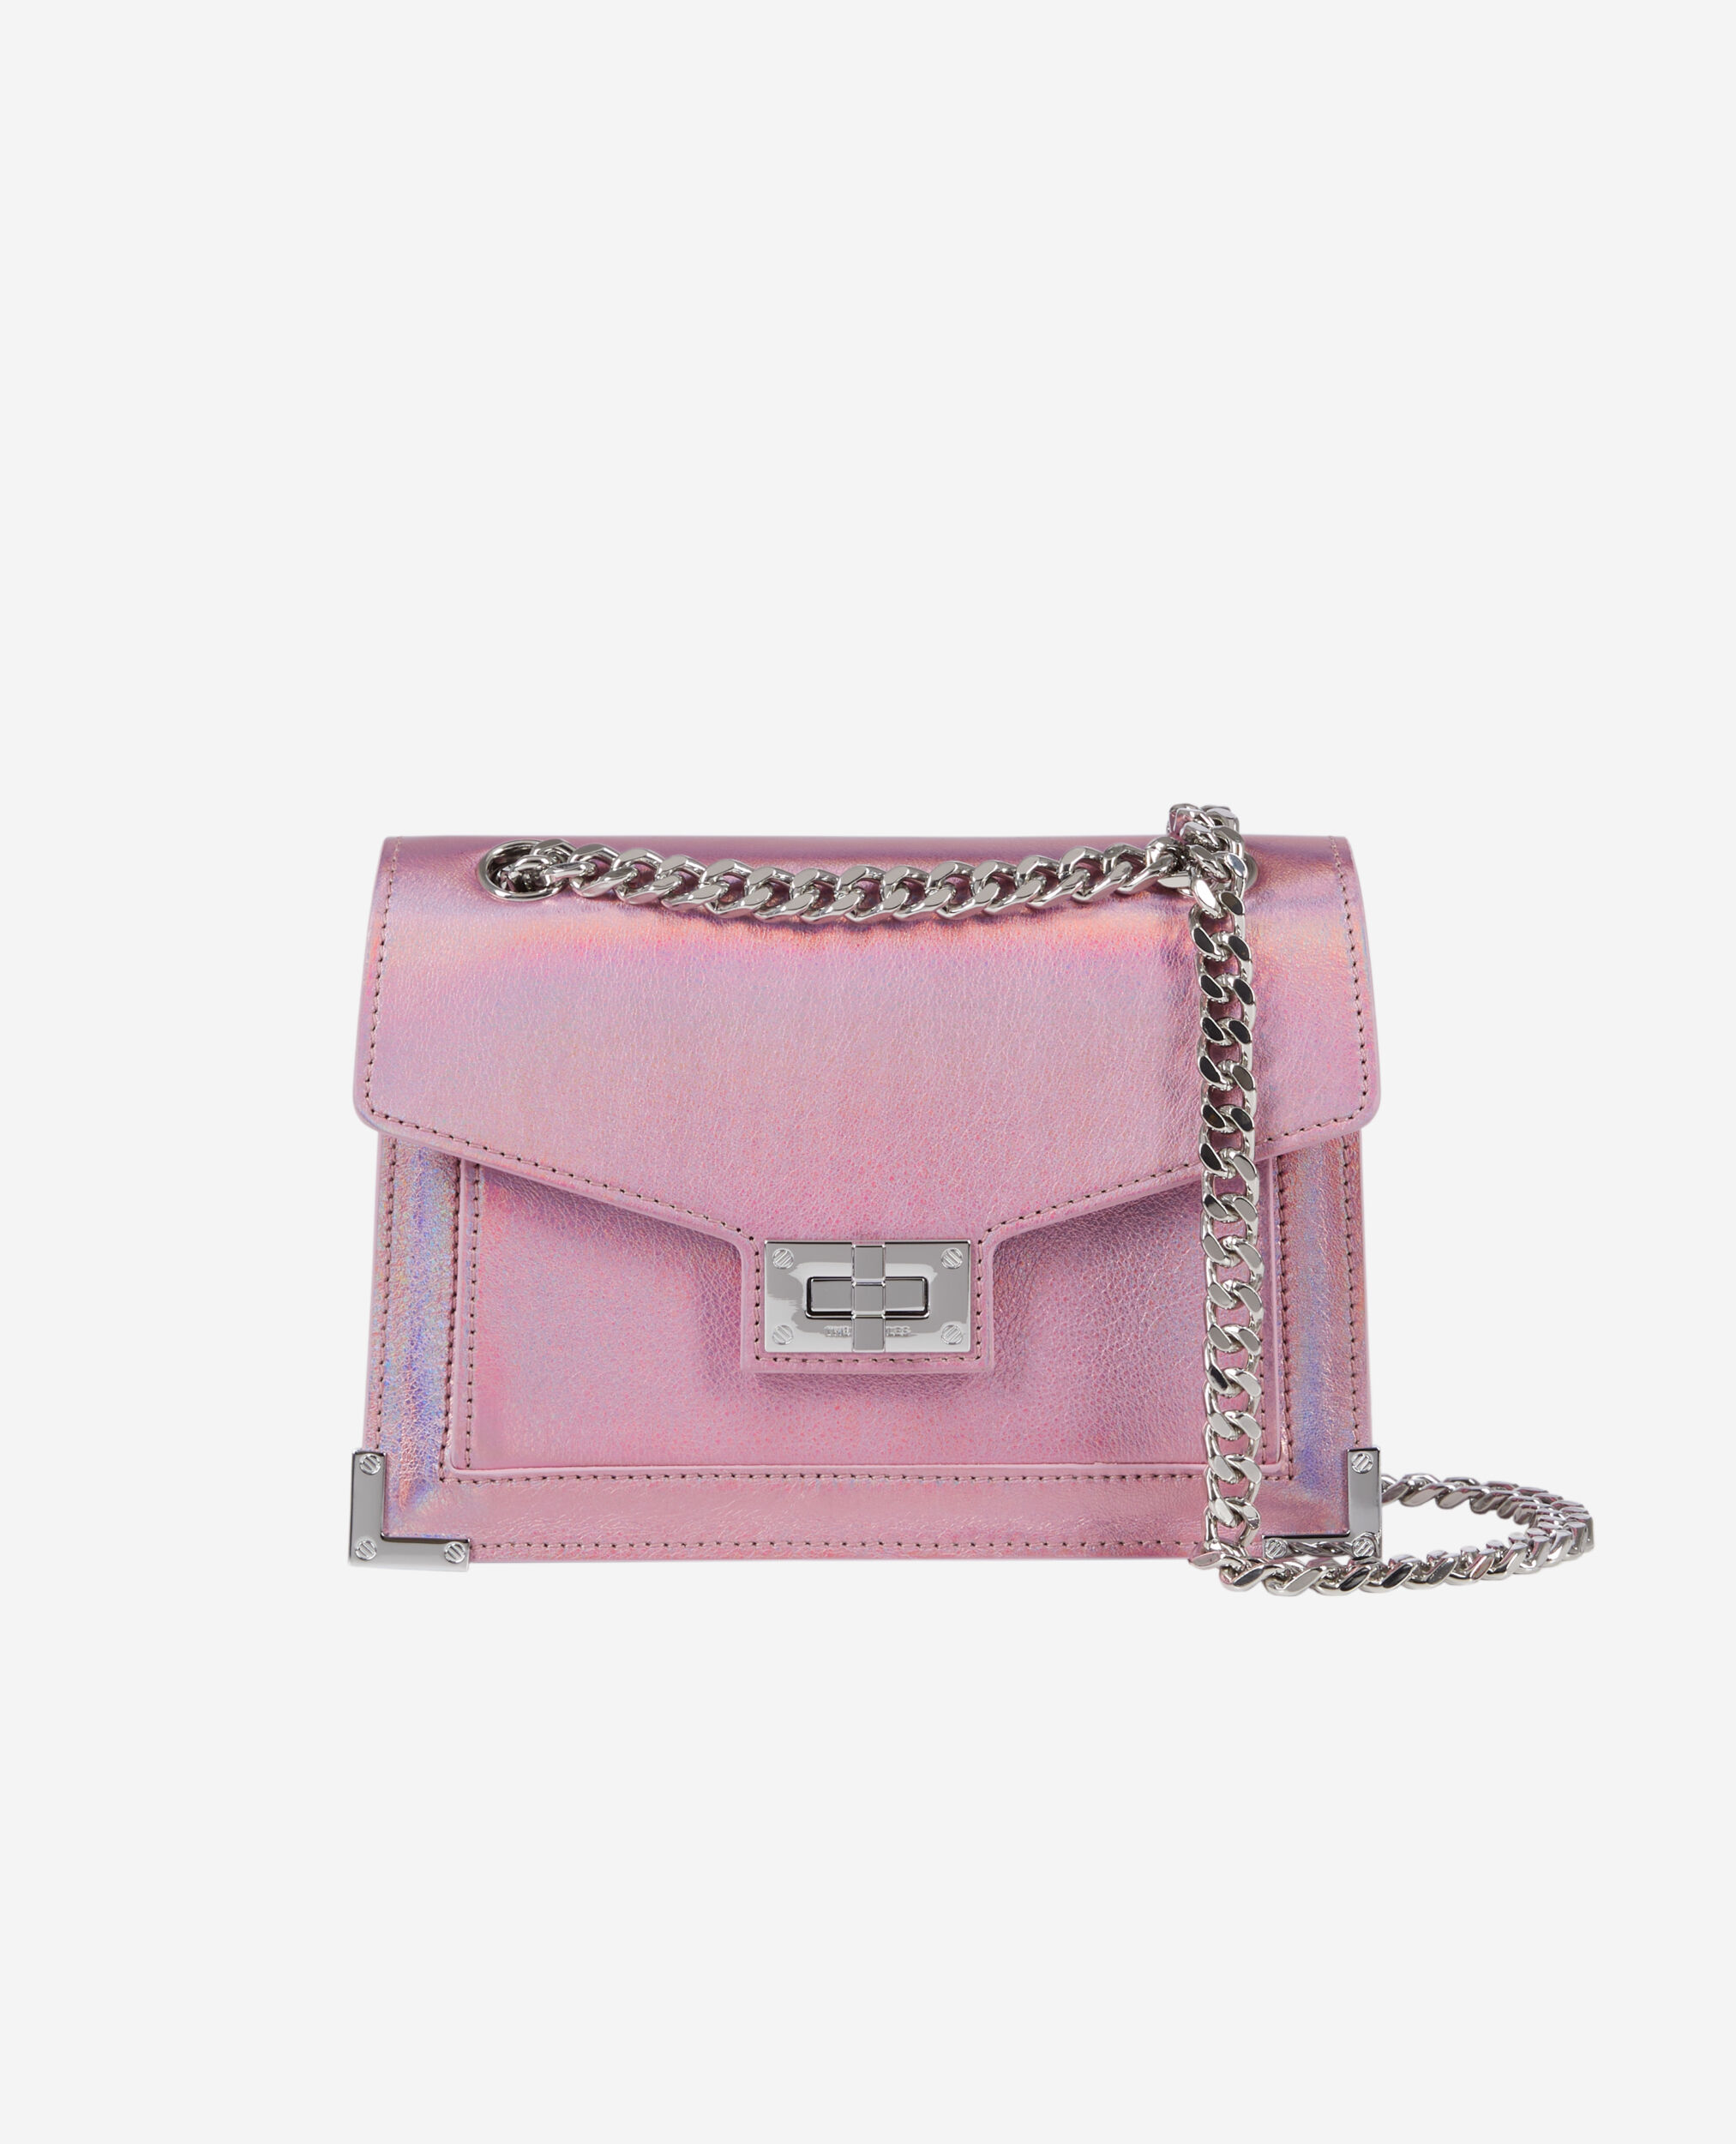 Emily small bag in pink leather | The Kooples